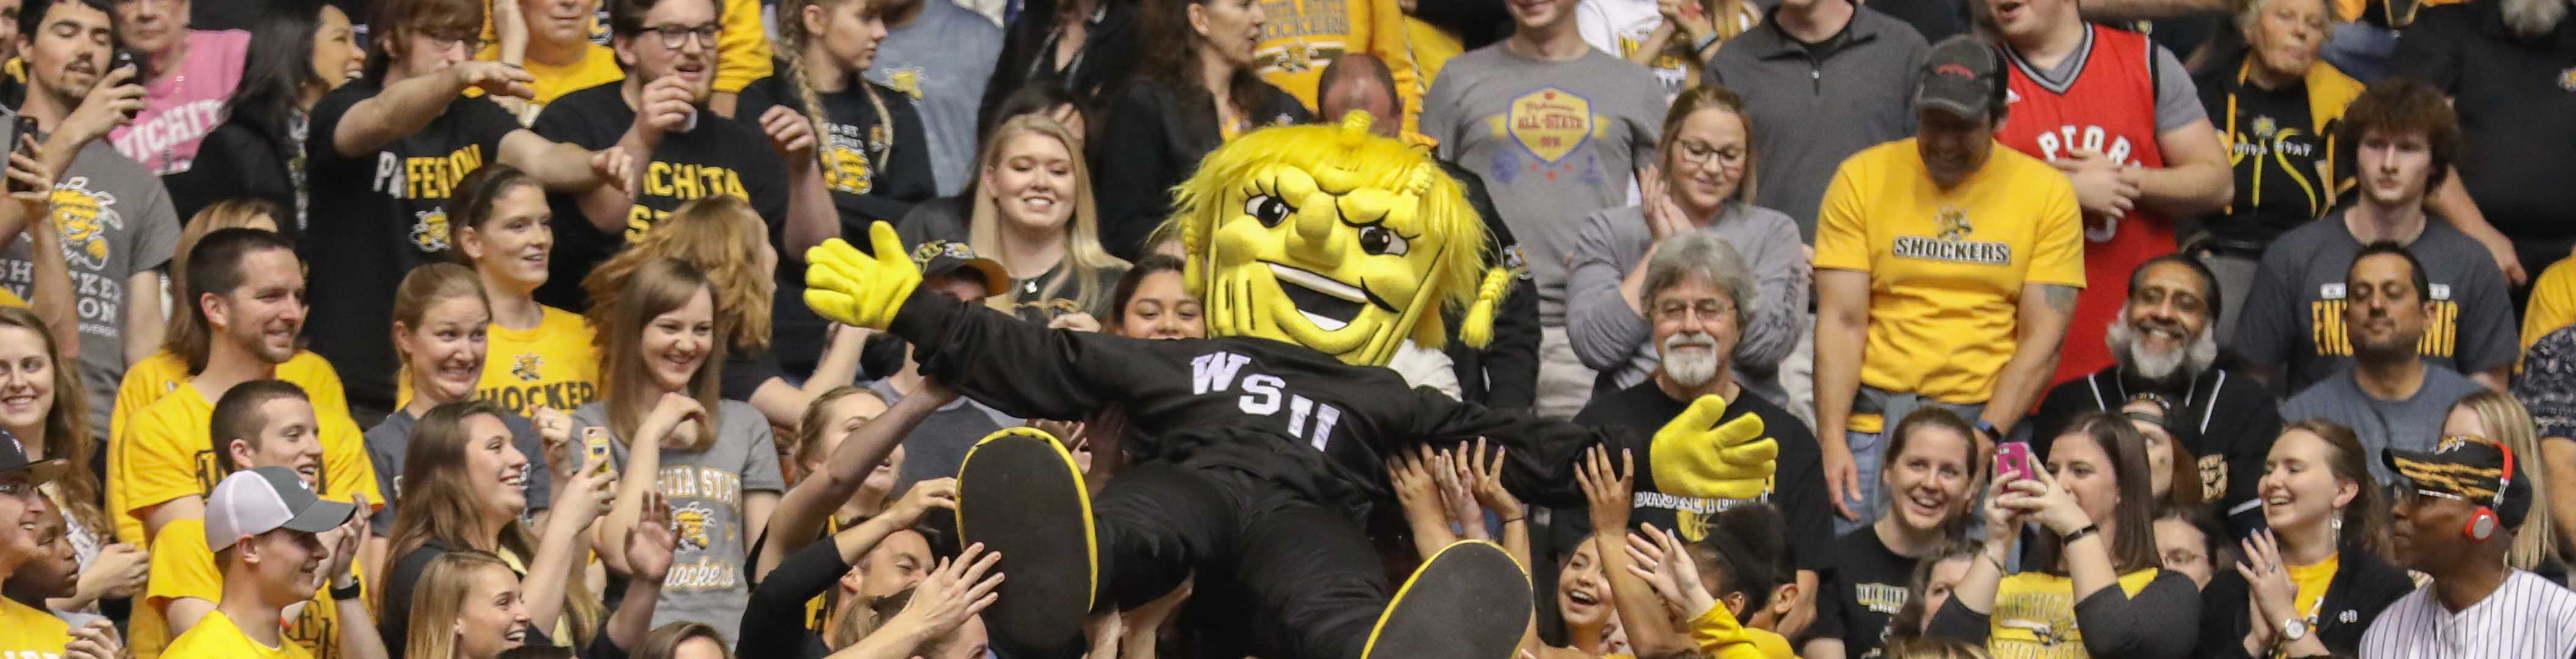 wushock crowdsurfing at a basketball game